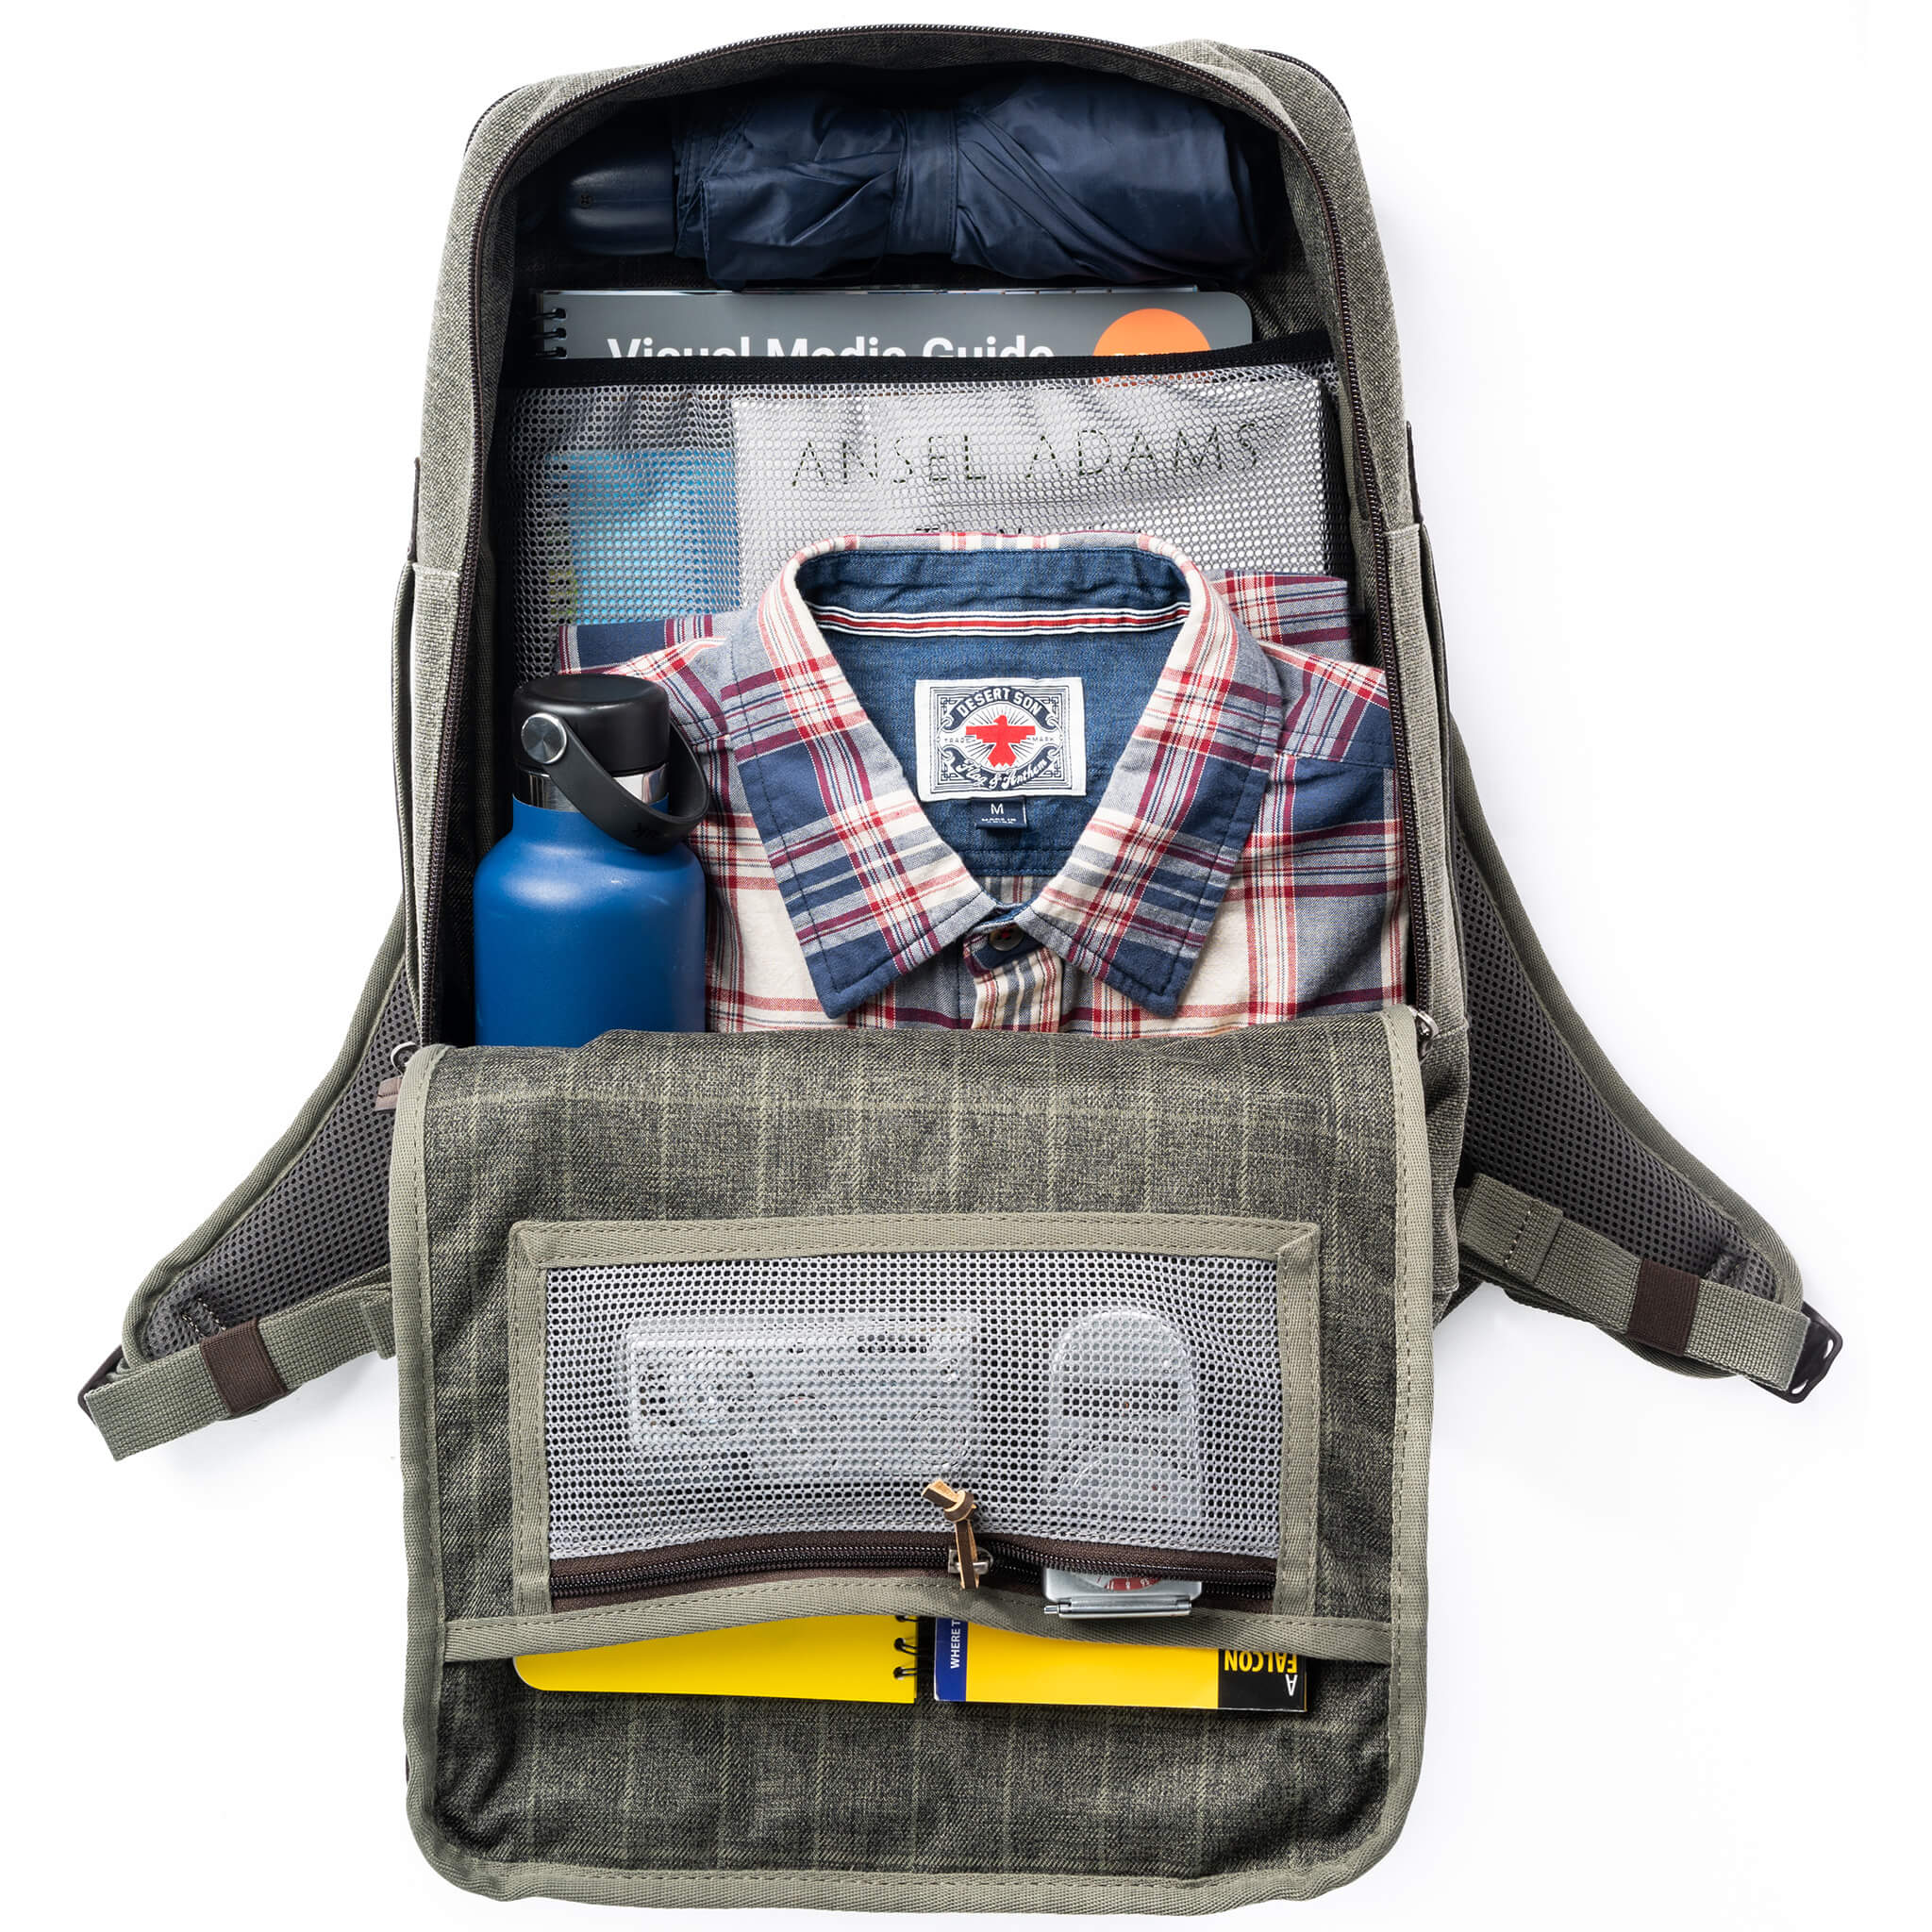 Fit ALL your gear in ONE BAG! 